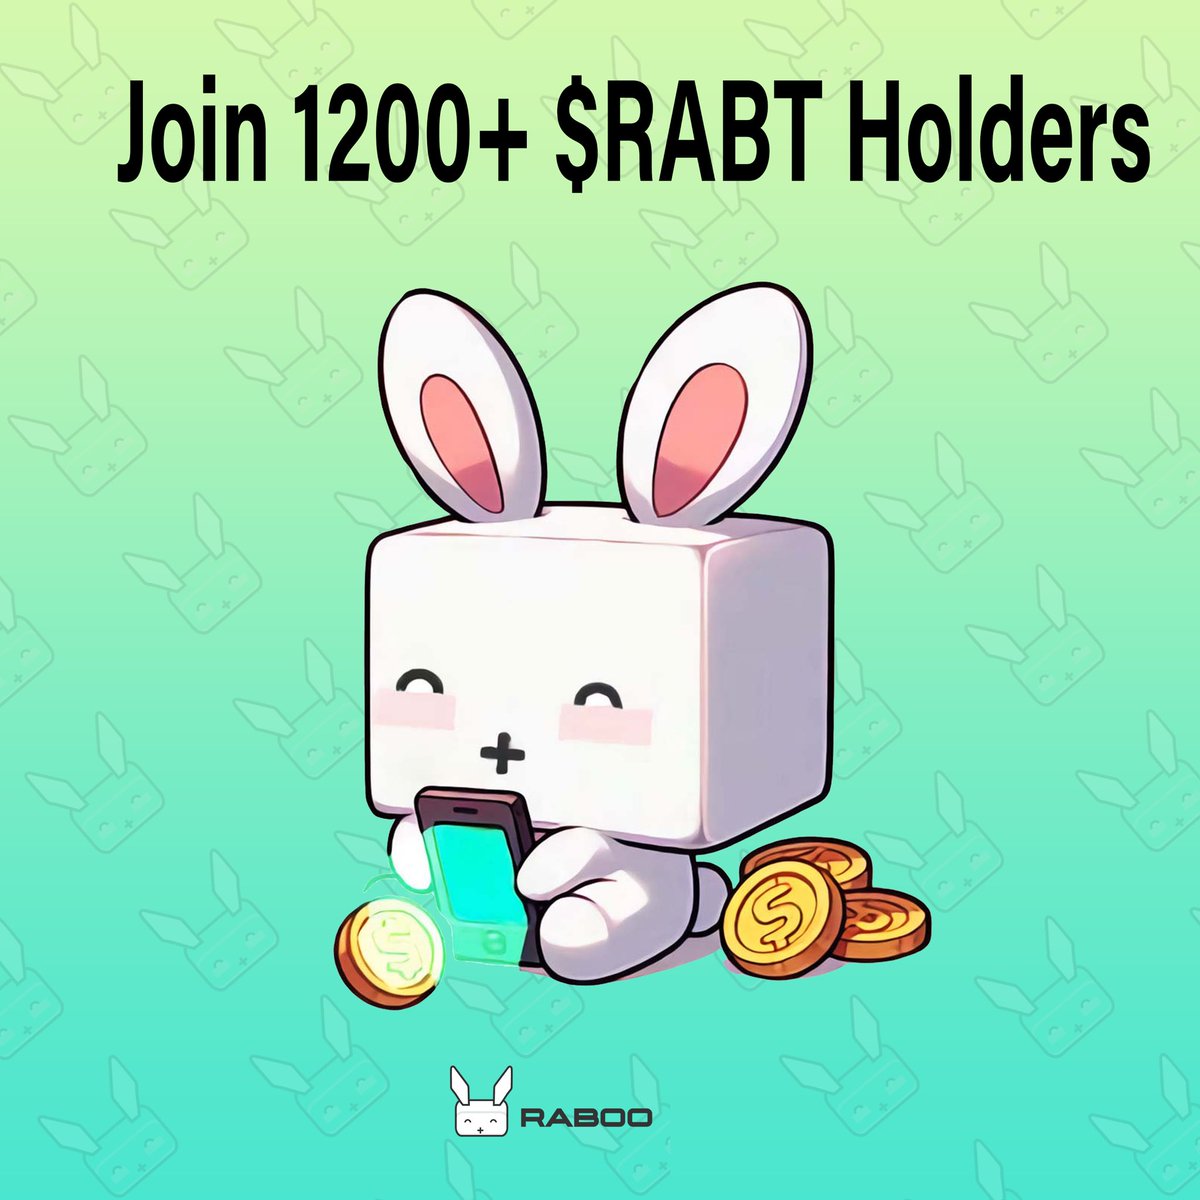 In a little over 2 weeks, 3300 accounts have registered for the presale, with over 1200 Token holders 💰🐇 We’re in the 2nd stage of the presale. You’re still early. Check out presale.rabootoken.com/register Join our TG: t.me/RabootokenPort… #Rabootoken #meme #presale #DeFi